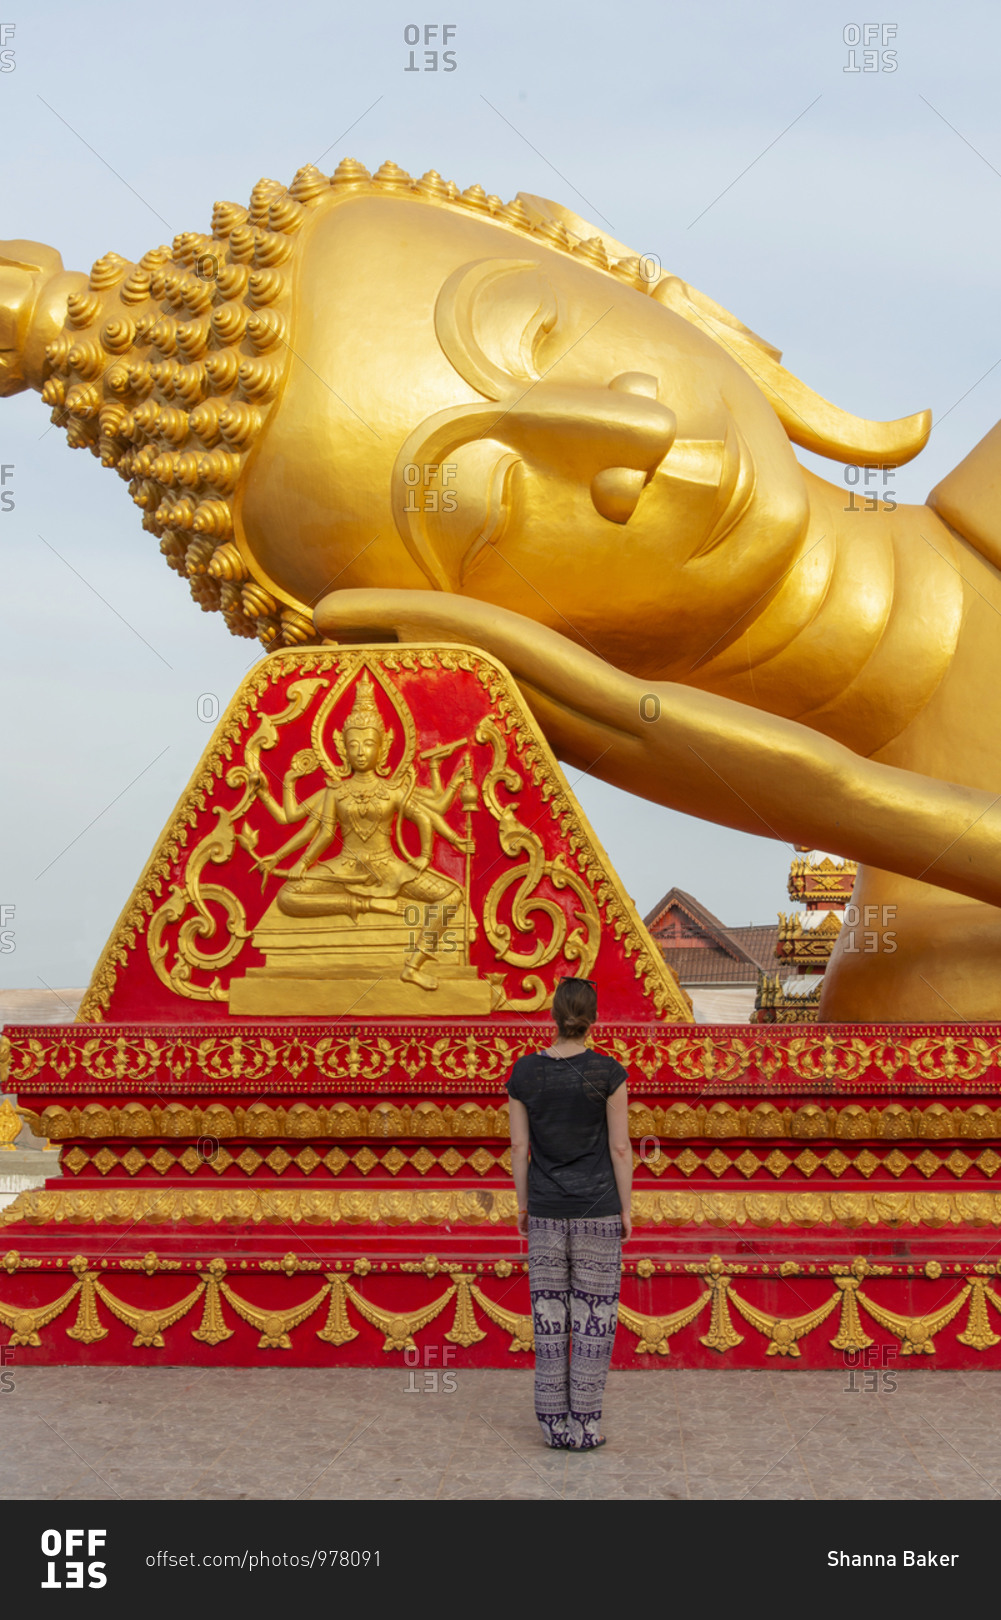 Woman looking at a giant, golden reclining Buddha statue in Vientiane, Laos